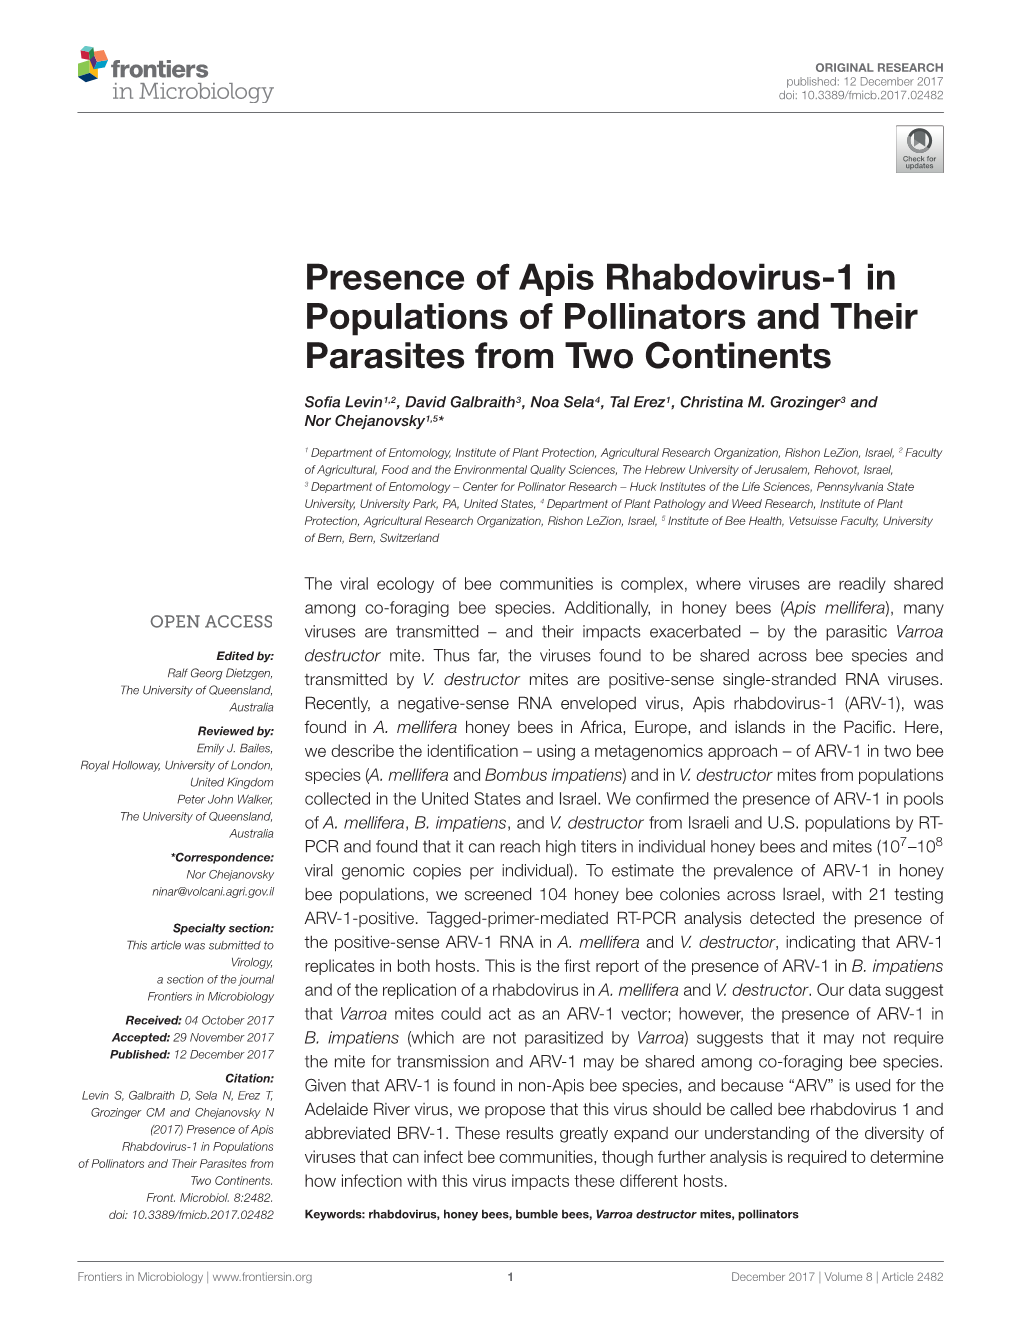 Presence of Apis Rhabdovirus-1 in Populations of Pollinators and Their Parasites from Two Continents